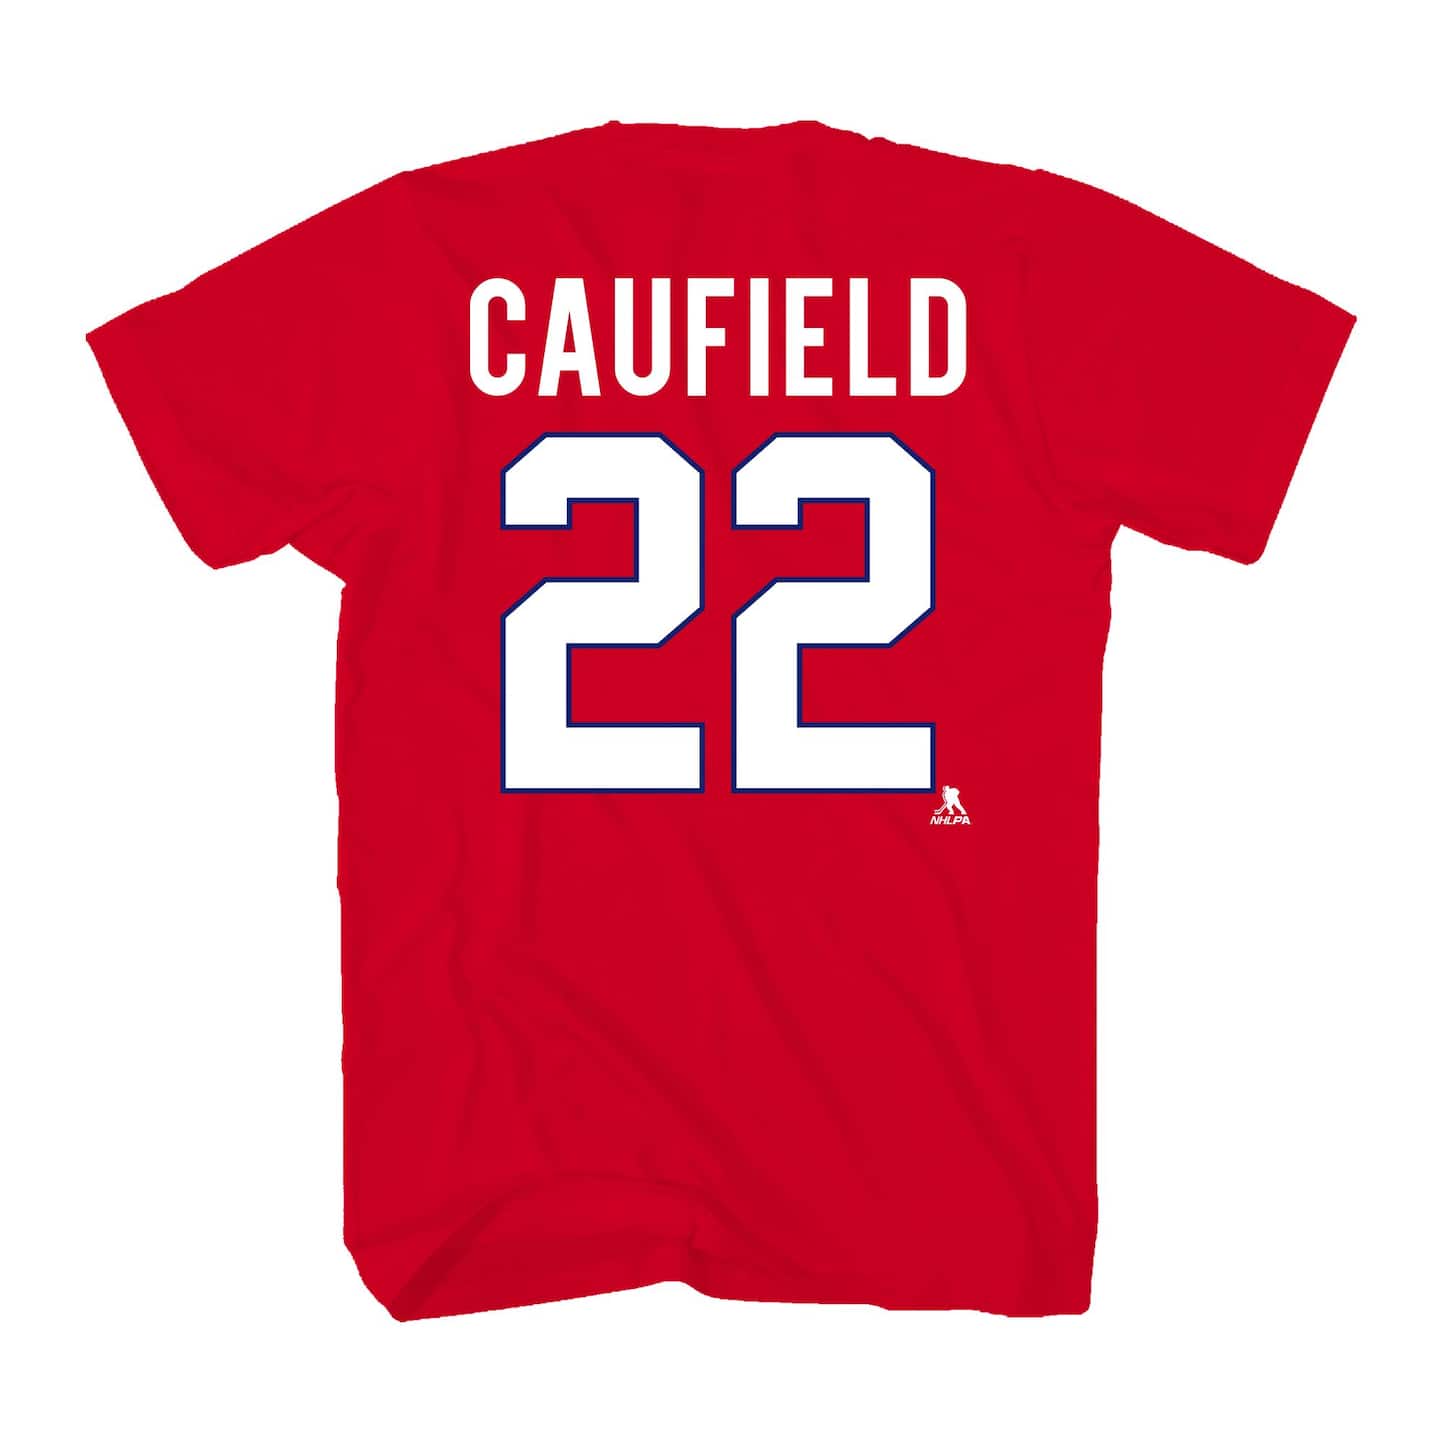 Cole Caufield Montreal Canadiens Jerseys, Cole Caufield Canadiens T-Shirts,  Gear